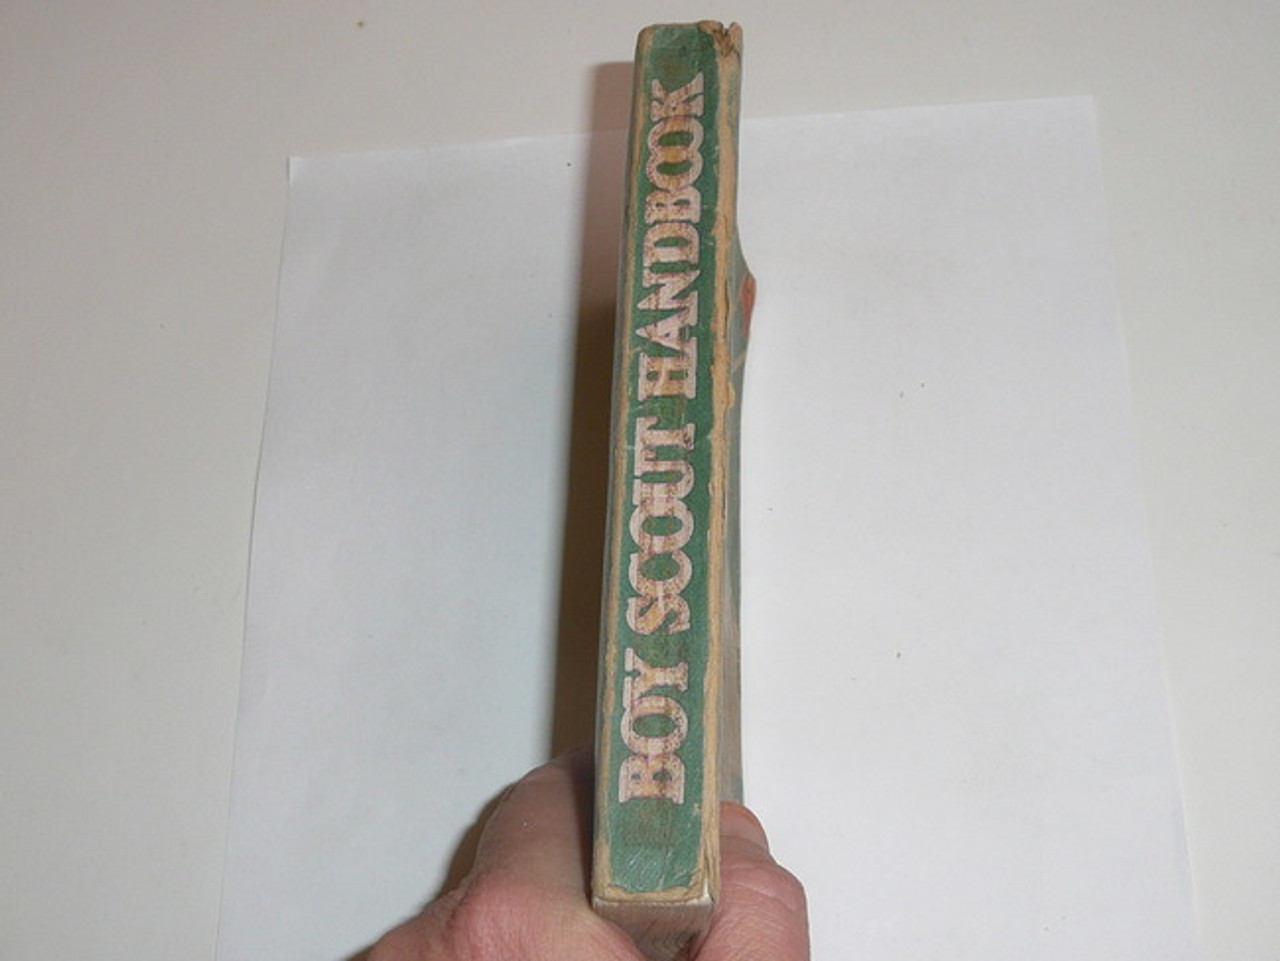 1944 Boy Scout Handbook, Fourth Edition, Thirty-seventh Printing, Norman Rockwell Cover, used with cover spine and some page wear